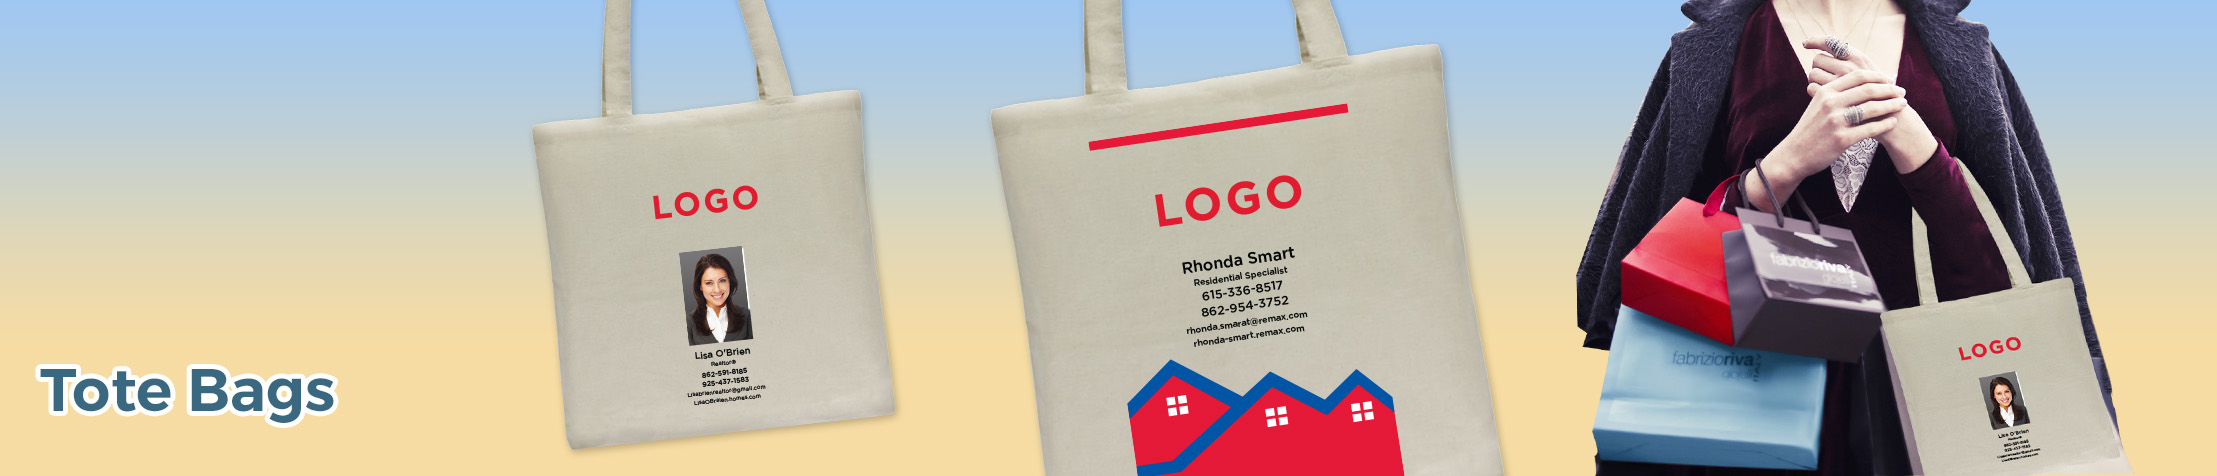 RE/MAX Real Estate Tote Bags - RE/MAX  personalized realtor promotional products | BestPrintBuy.com